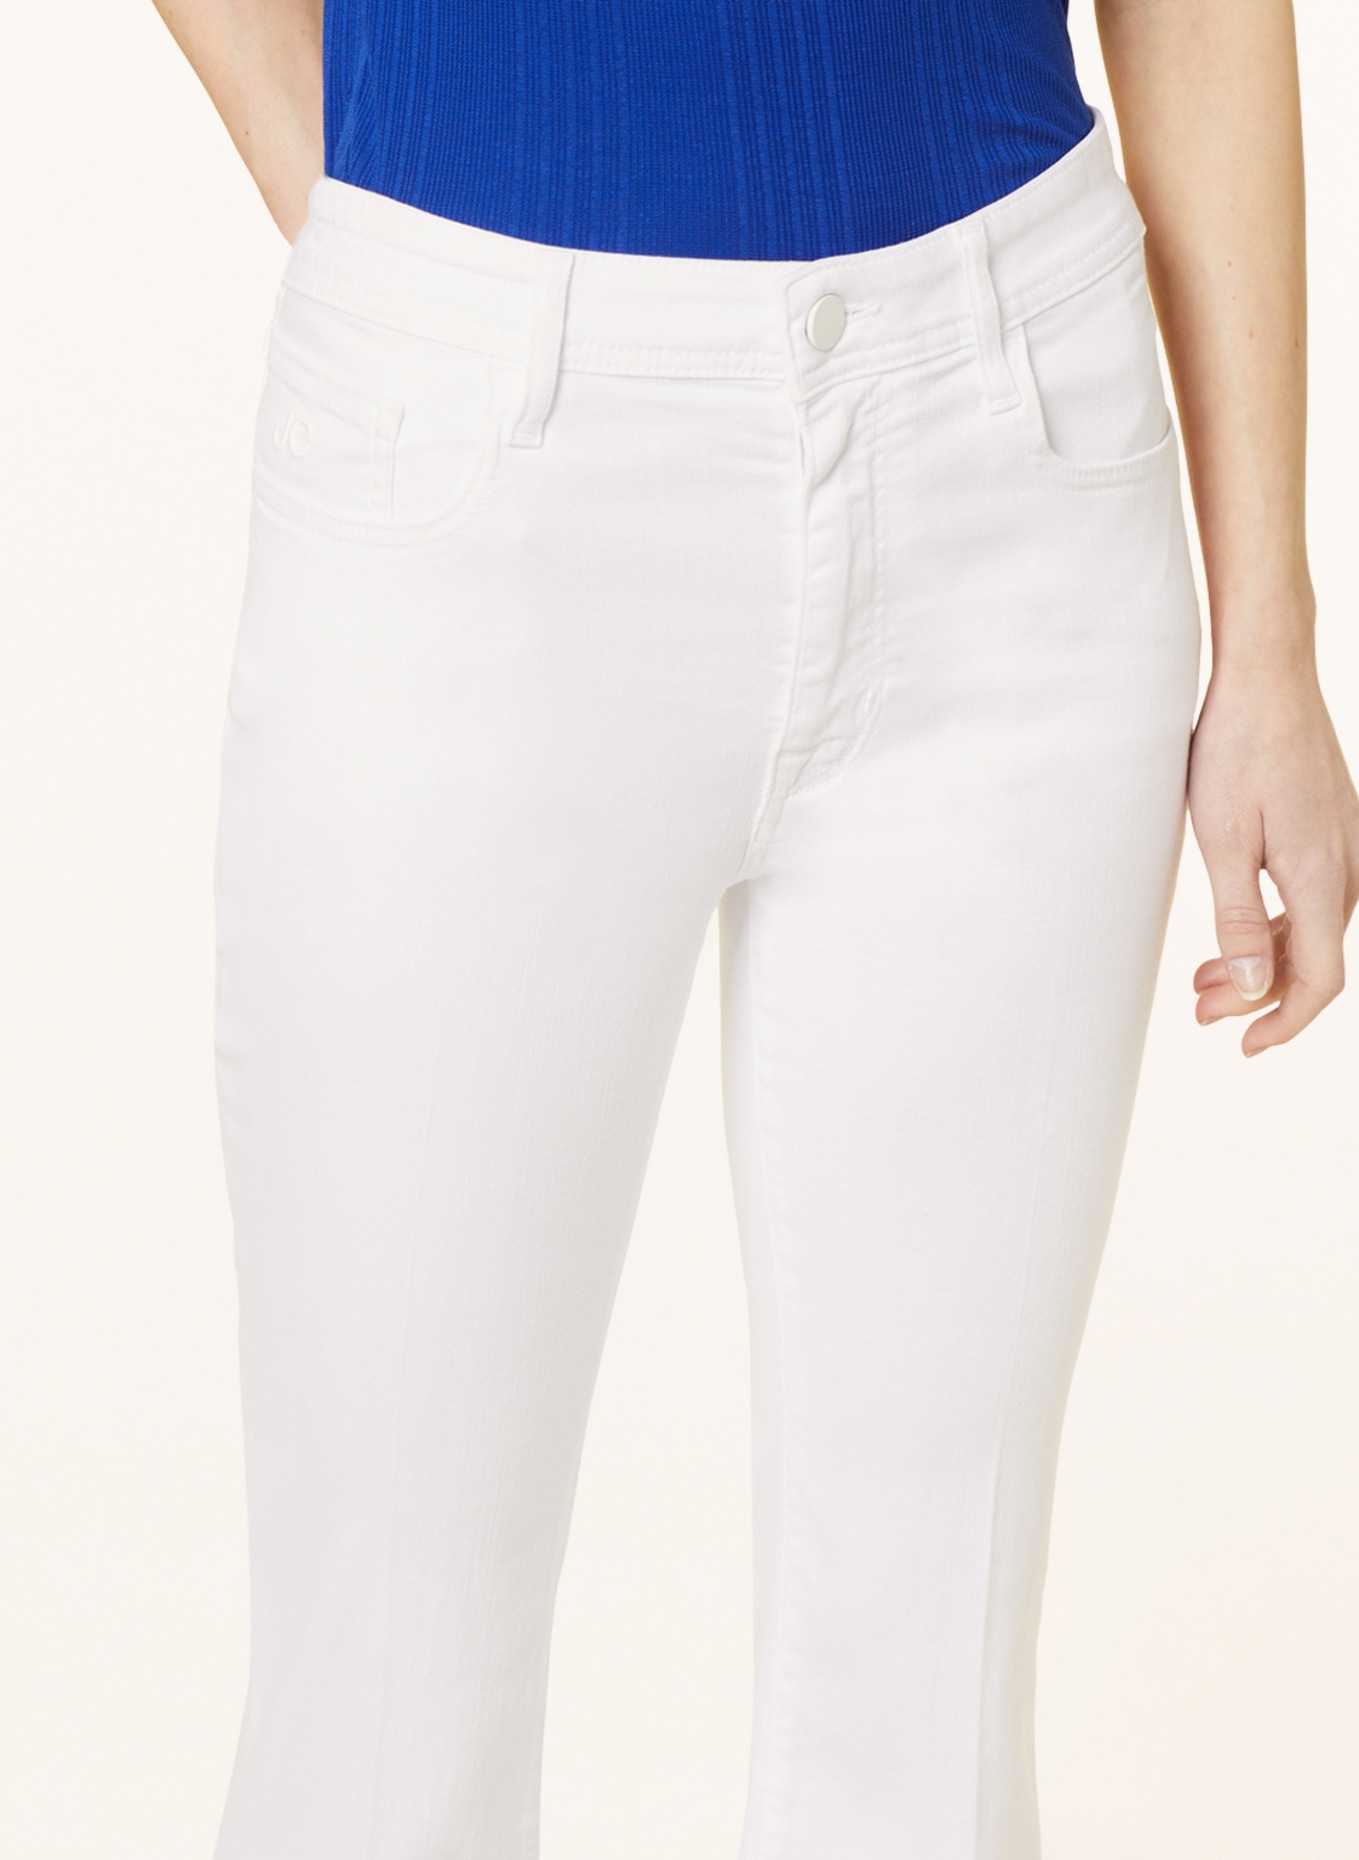 JACOB COHEN Flared Jeans VICTORIA, Farbe: WEISS (Bild 5)